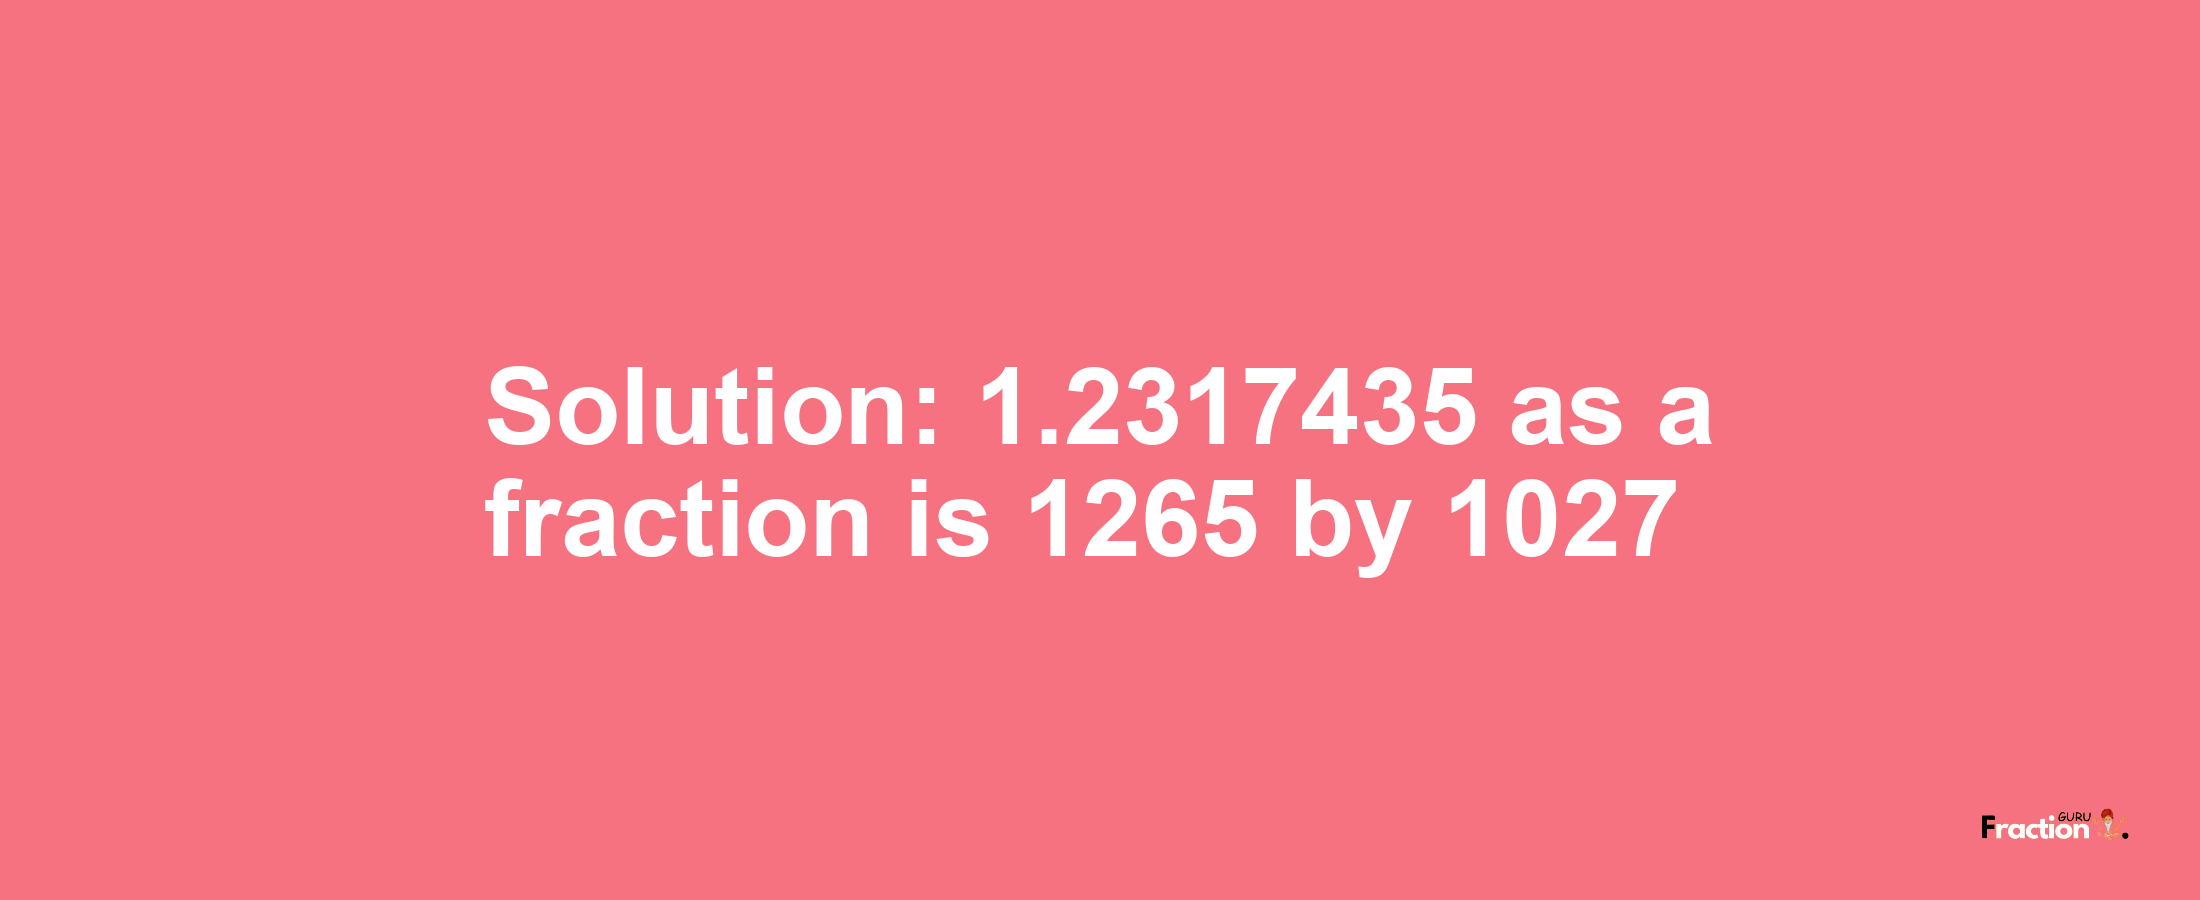 Solution:1.2317435 as a fraction is 1265/1027